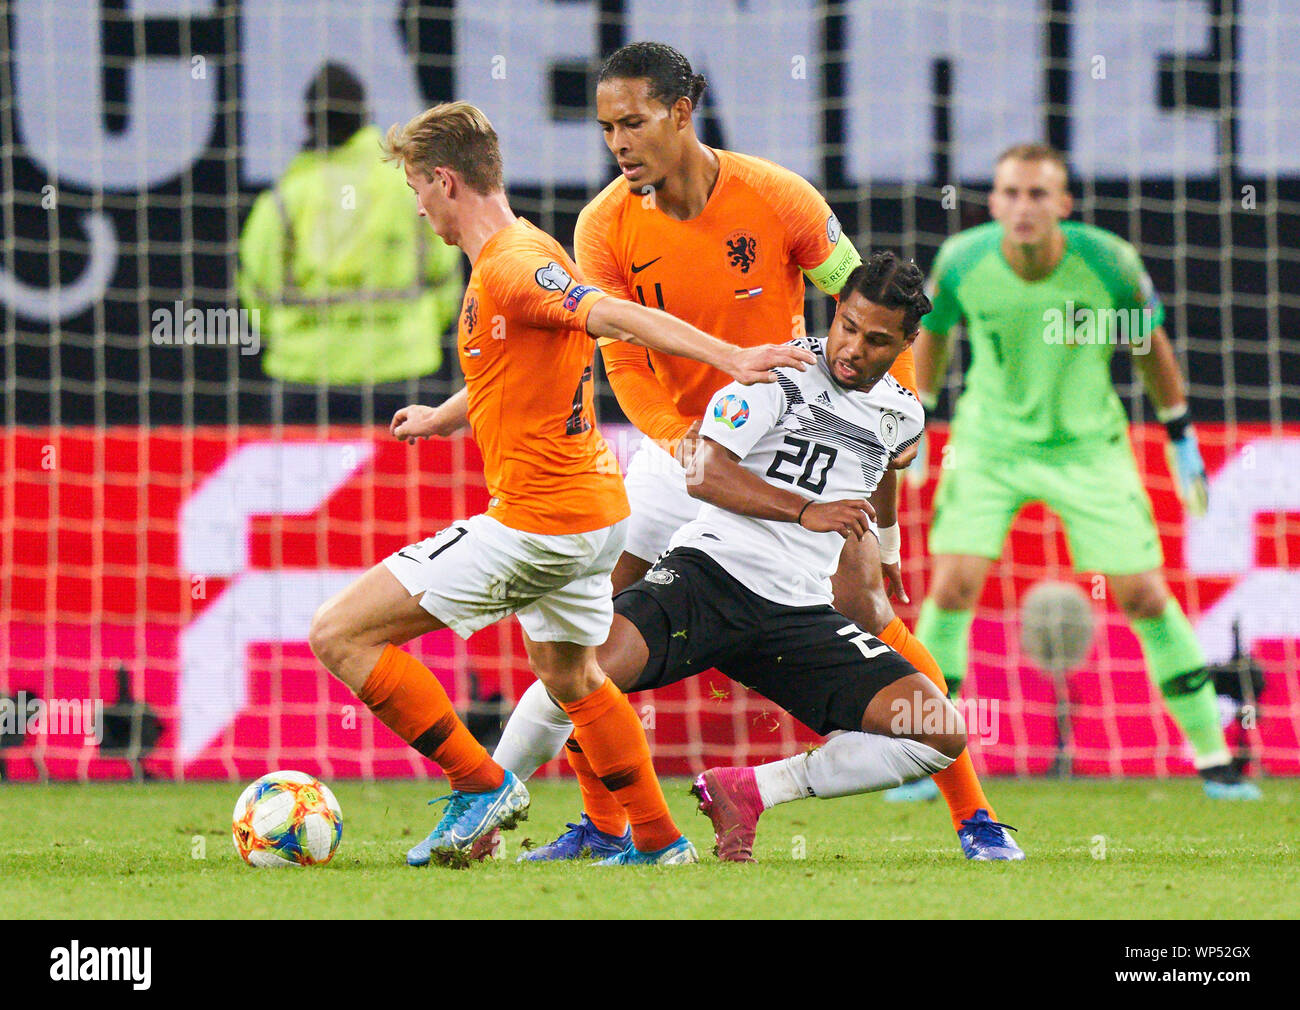 Hamburg, Germany. 06th Sep, 2019. Frenkie DE JONG, NL 21 Ryan BABEL, NL 9  compete for the ball, tackling, duel, header, zweikampf, action, fight  against Serge GNABRY, DFB 20 GERMANY - NETHERLANDS